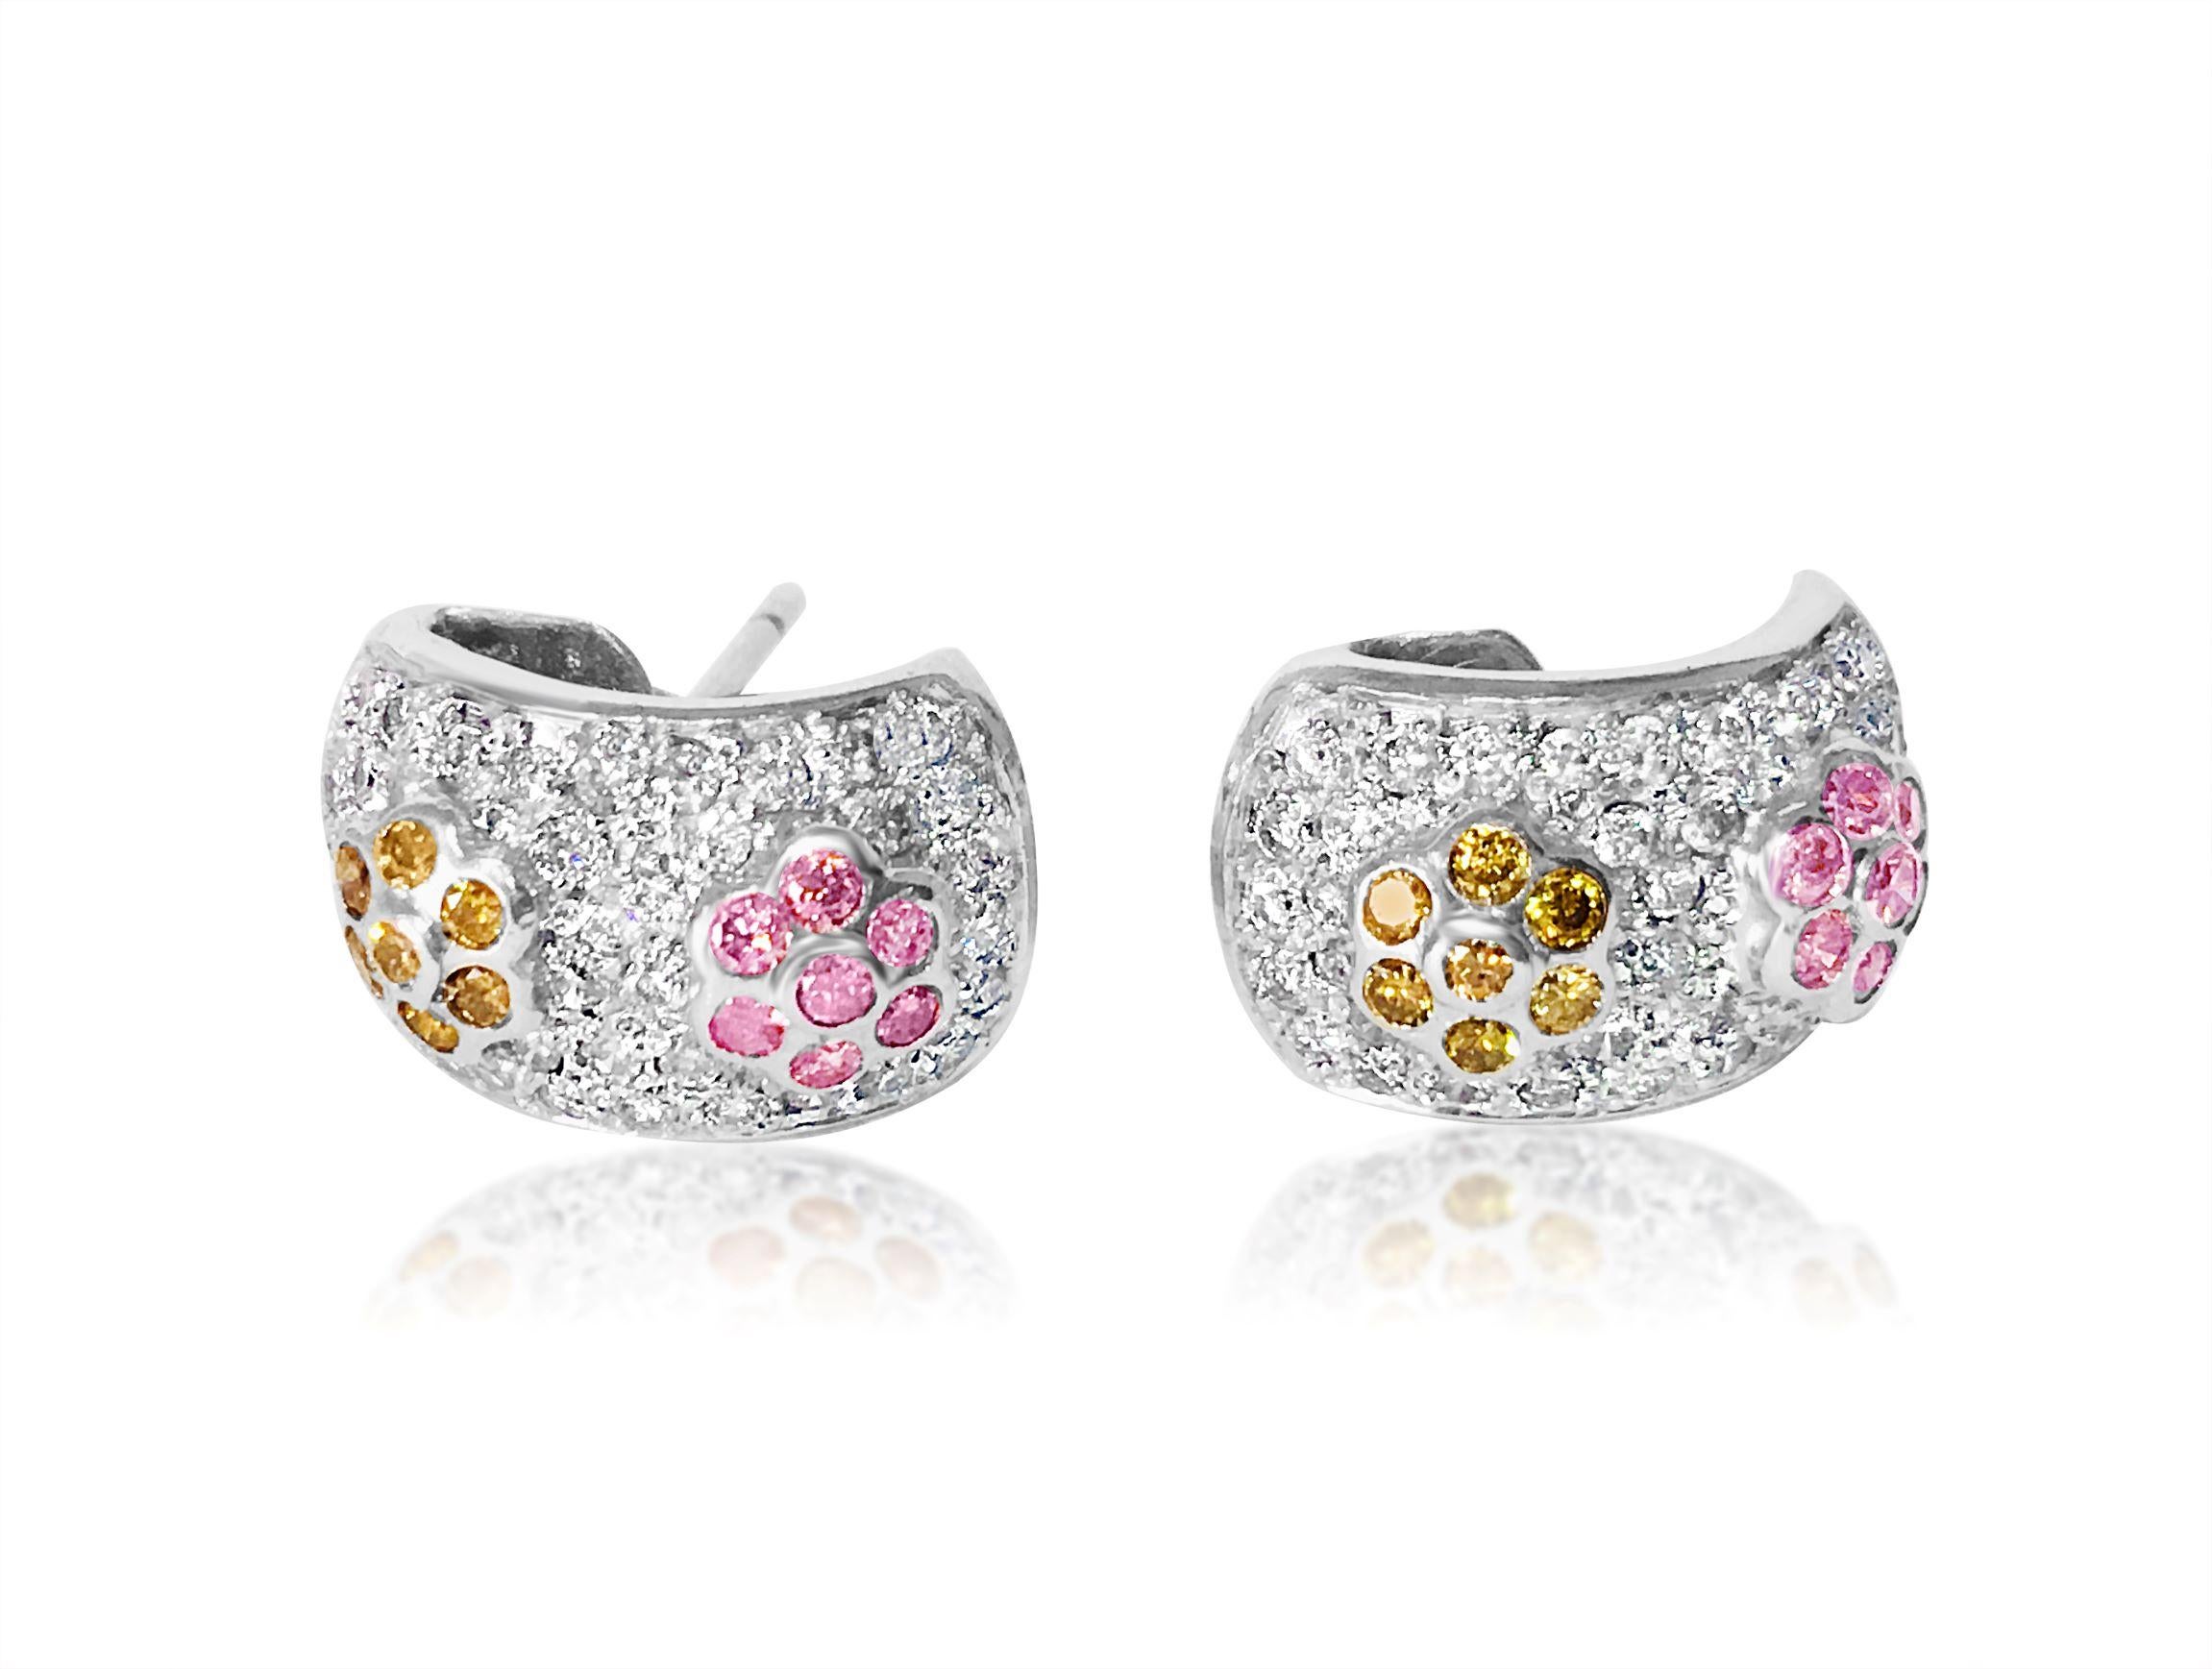 Fashioned from elegant 14K white gold, these earrings showcase a stunning array of yellow, white, and pink diamonds with a total carat weight of 2.00 carats. The white diamonds boast SI clarity and G color, while the pink and yellow diamonds exhibit